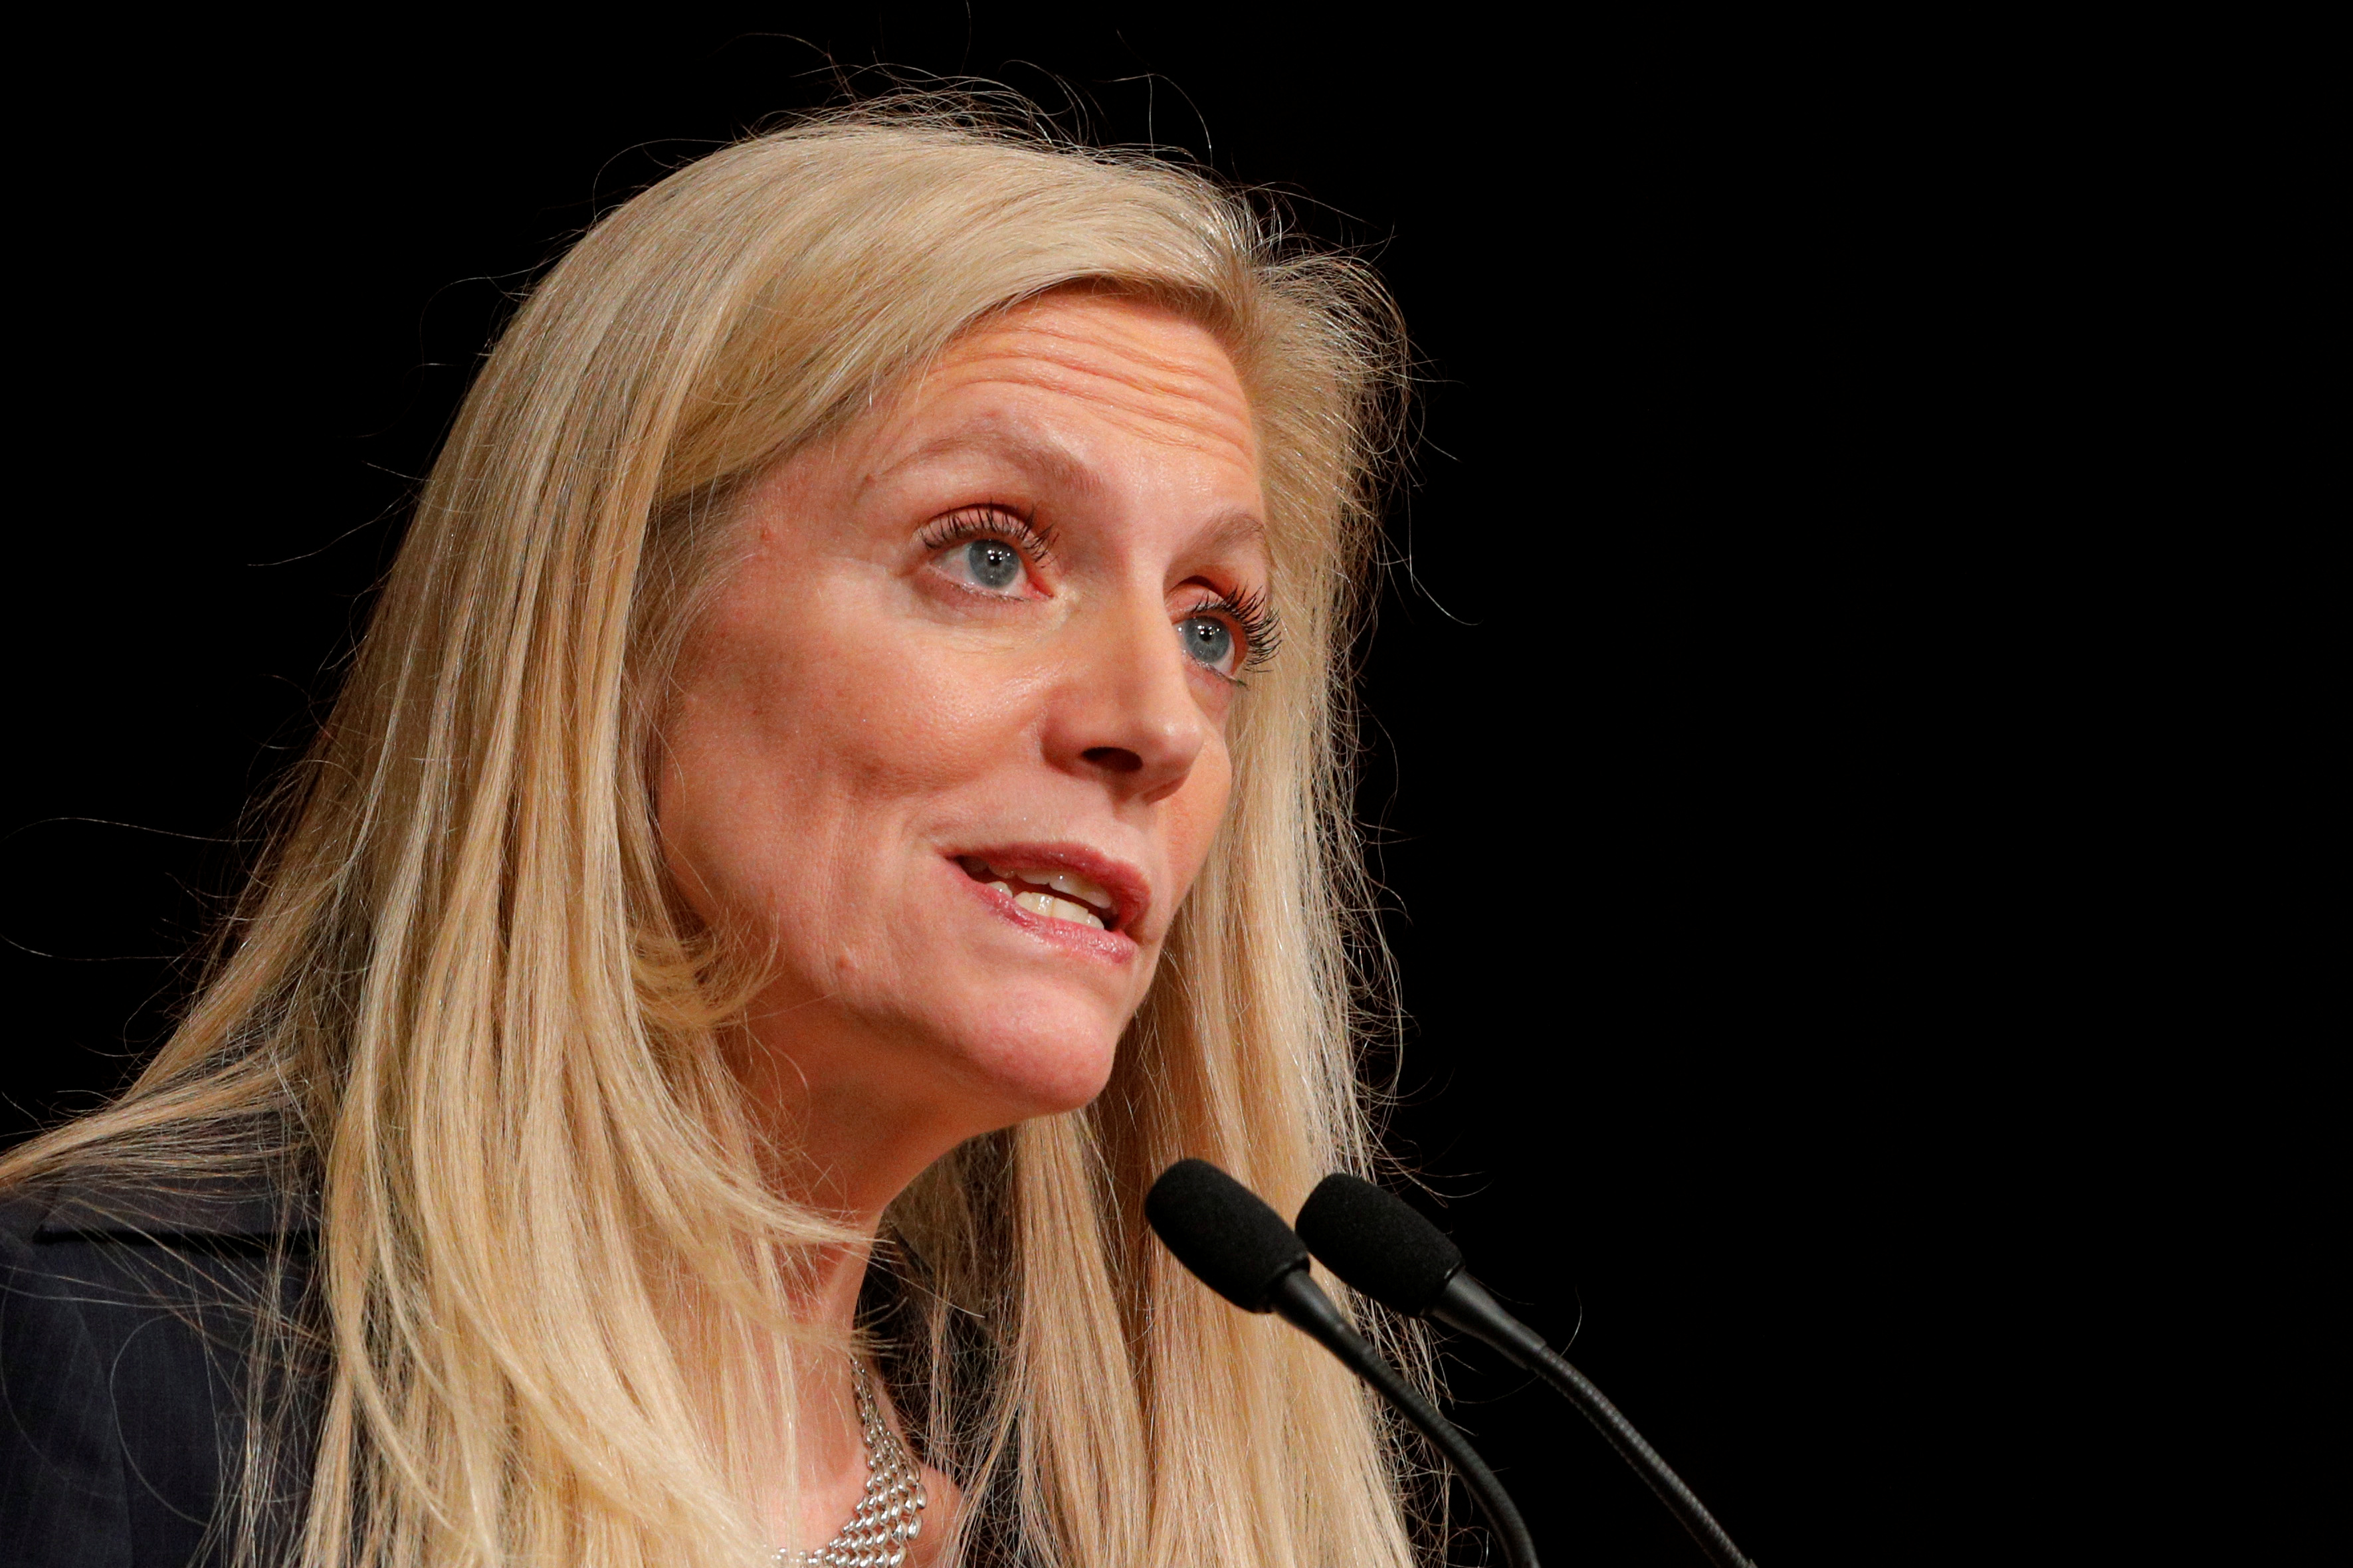 Federal Reserve Board Governor Lael Brainard speaks at the John F. Kennedy School of Government at Harvard University in Cambridge